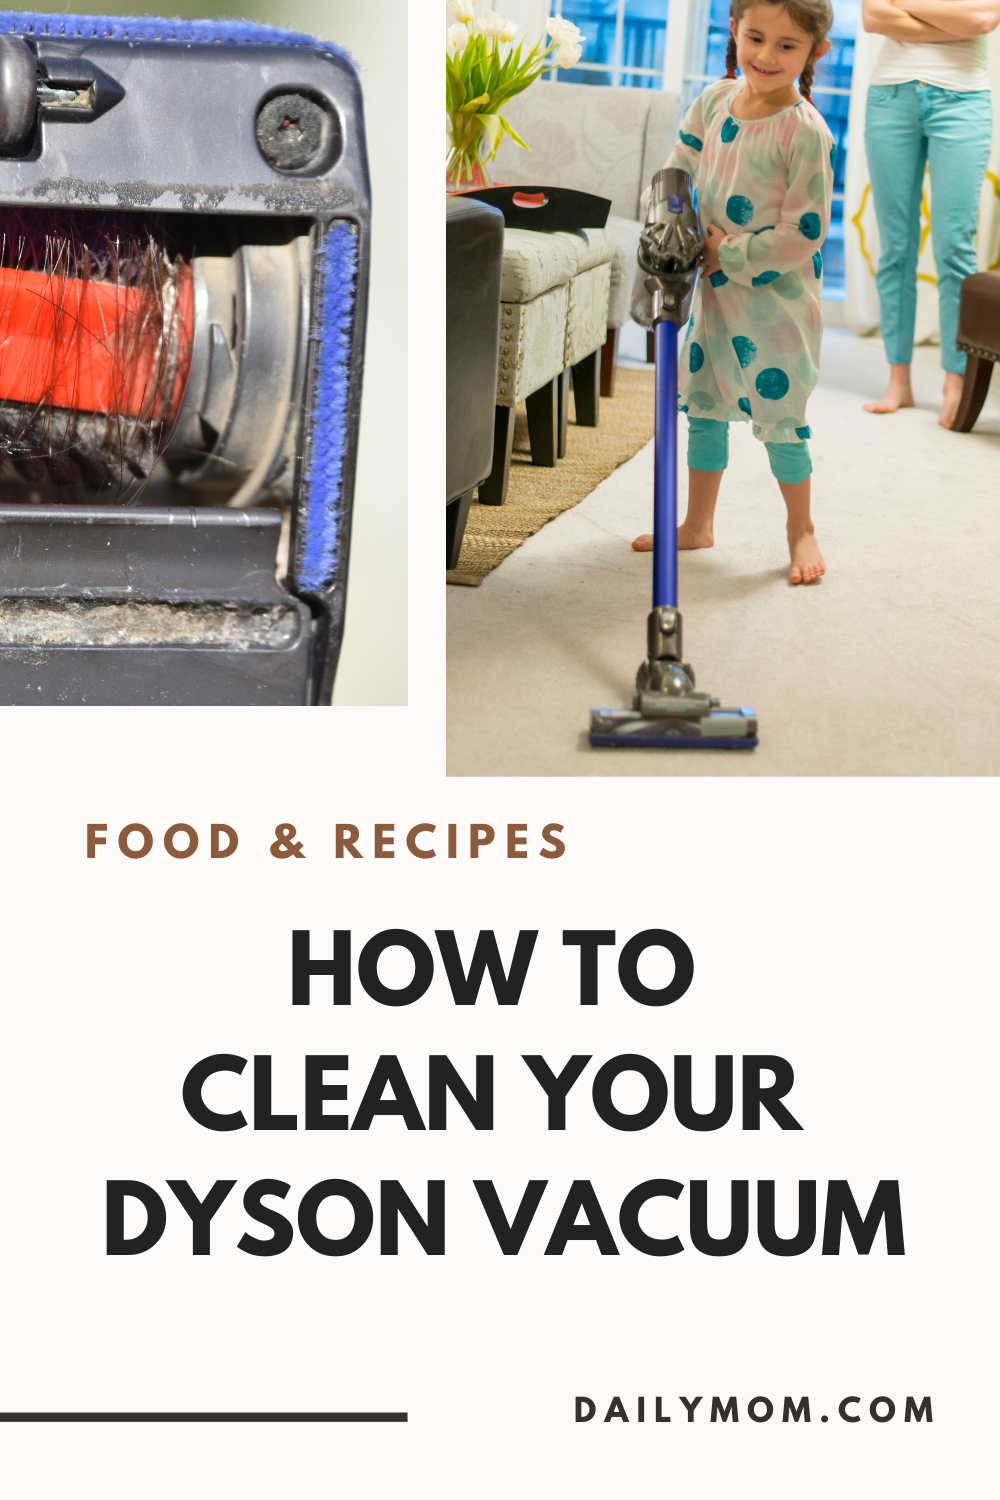 daily mom parent portal how to clean a dyson vacuum